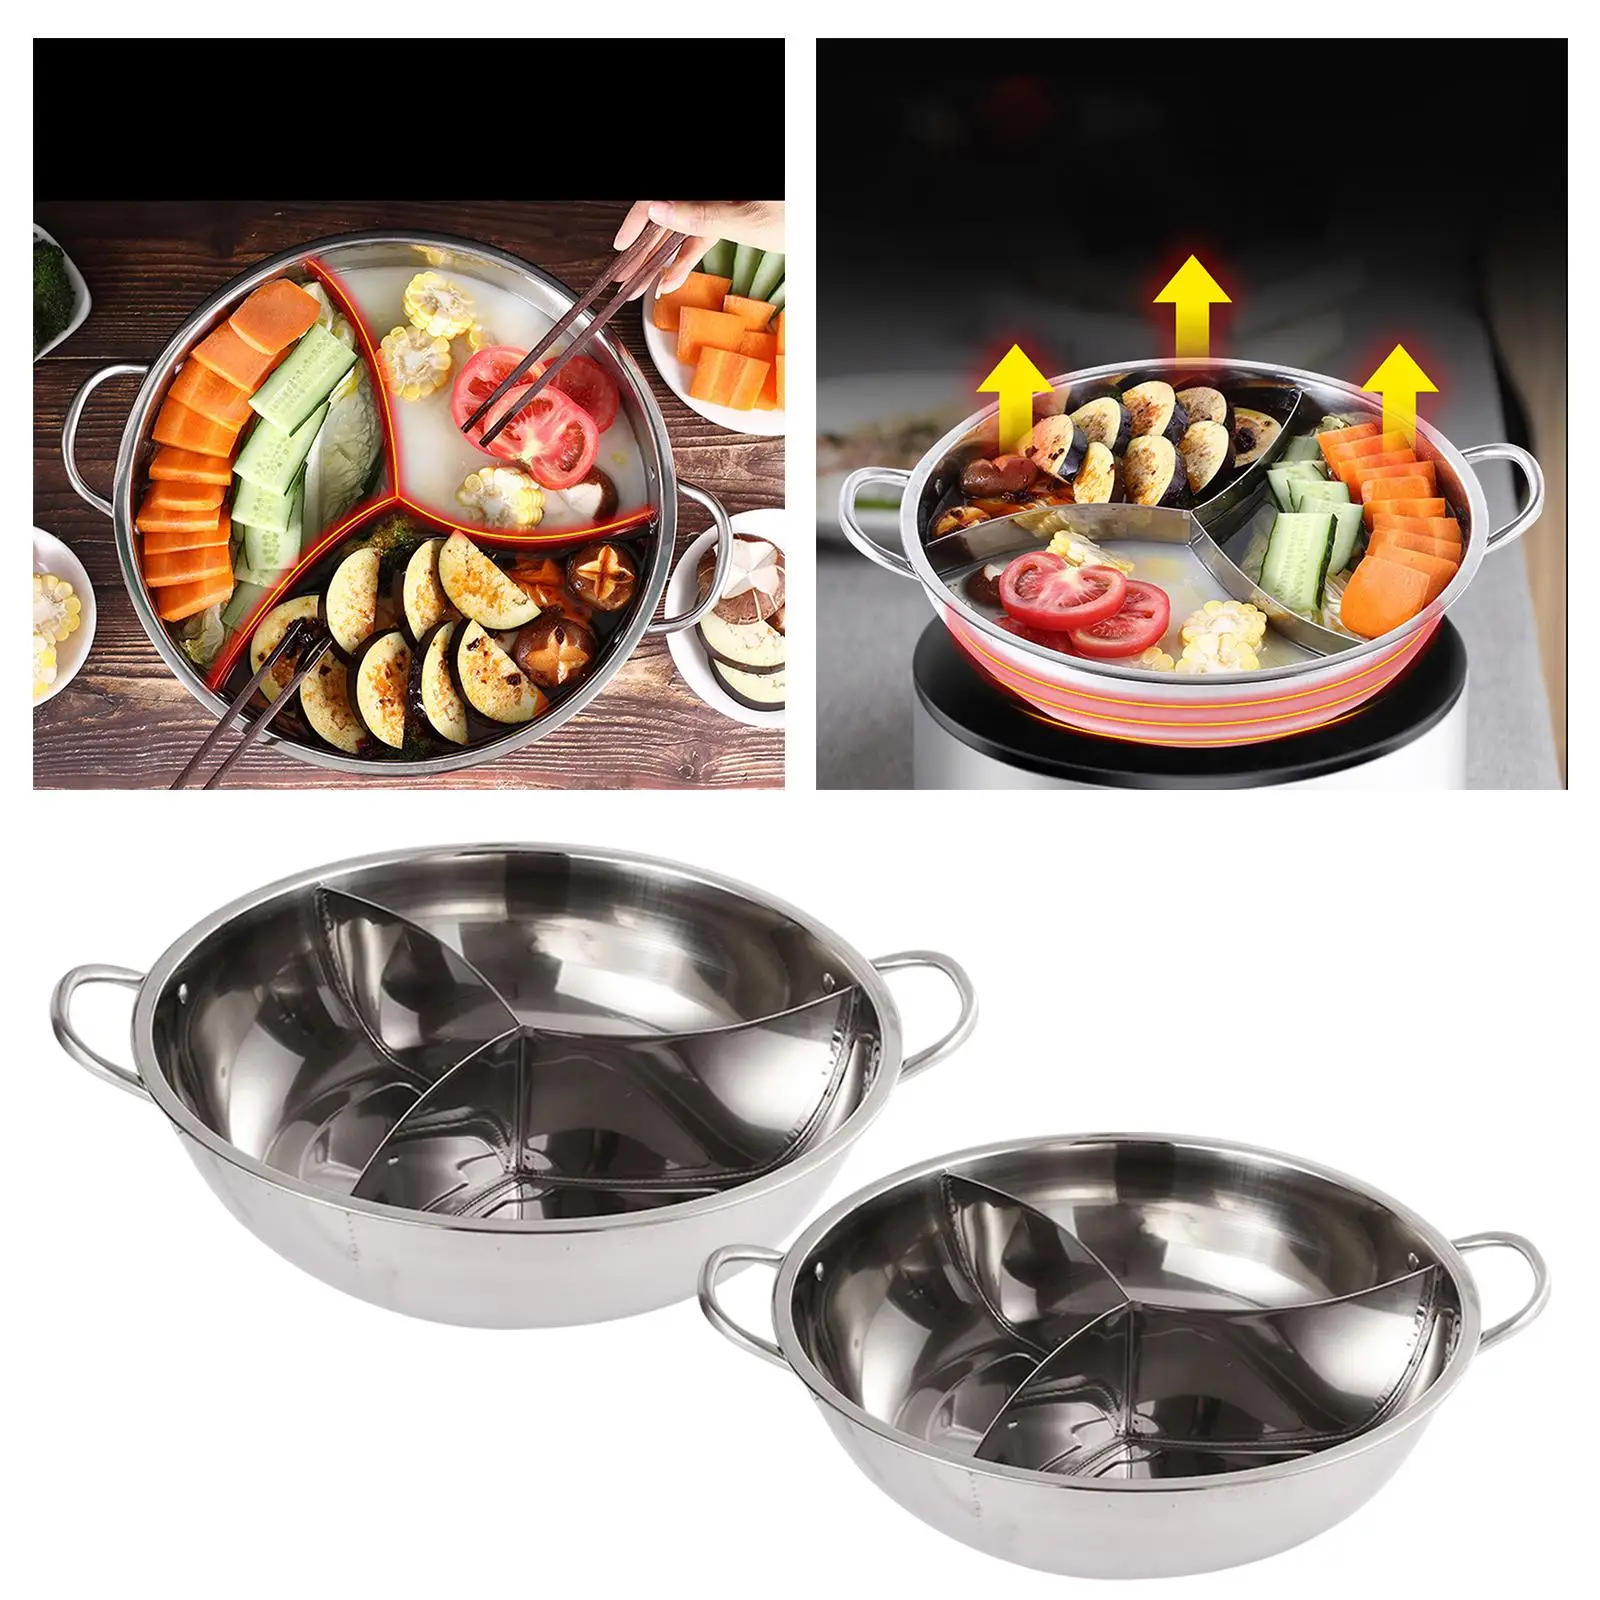 Household Cooking Pot Induction Cookware Soup Pot for